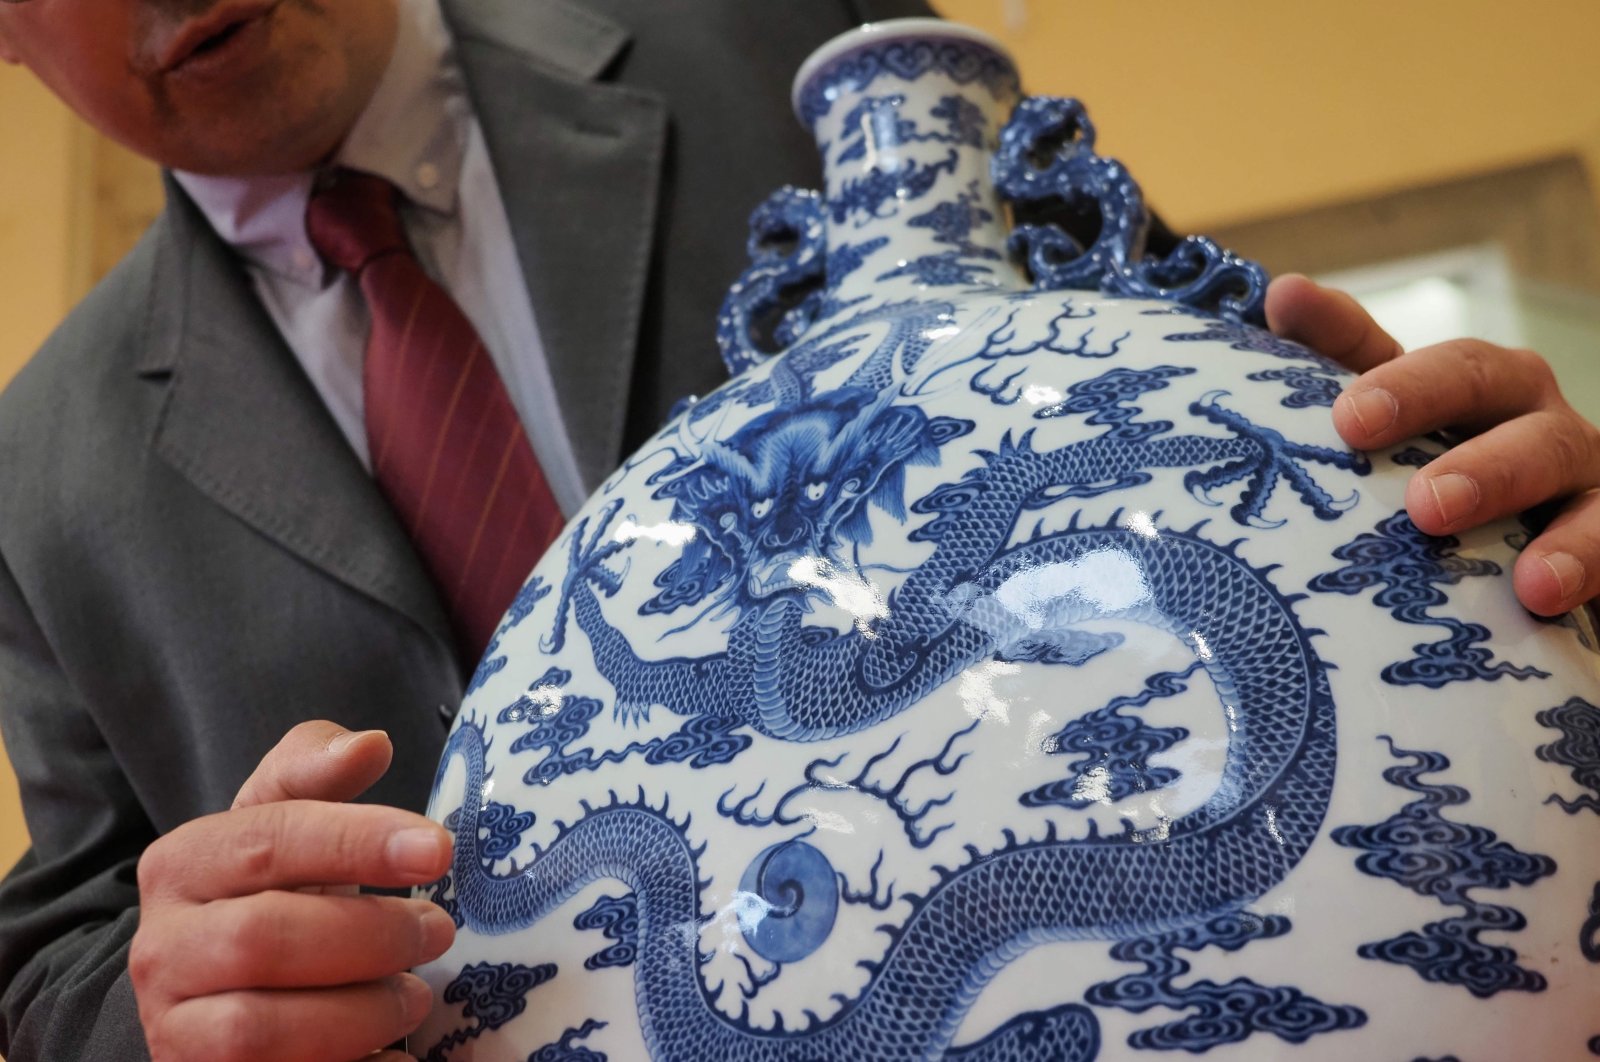 Auctioneer Olivier Clair presents a rare blue, white and celadon porcelain moon flask with a dragon belonging to the 18th century's emperor Qianlong on March 7, 2020 at the Palais Jacques Coeur in Bourges. (AFP Photo)